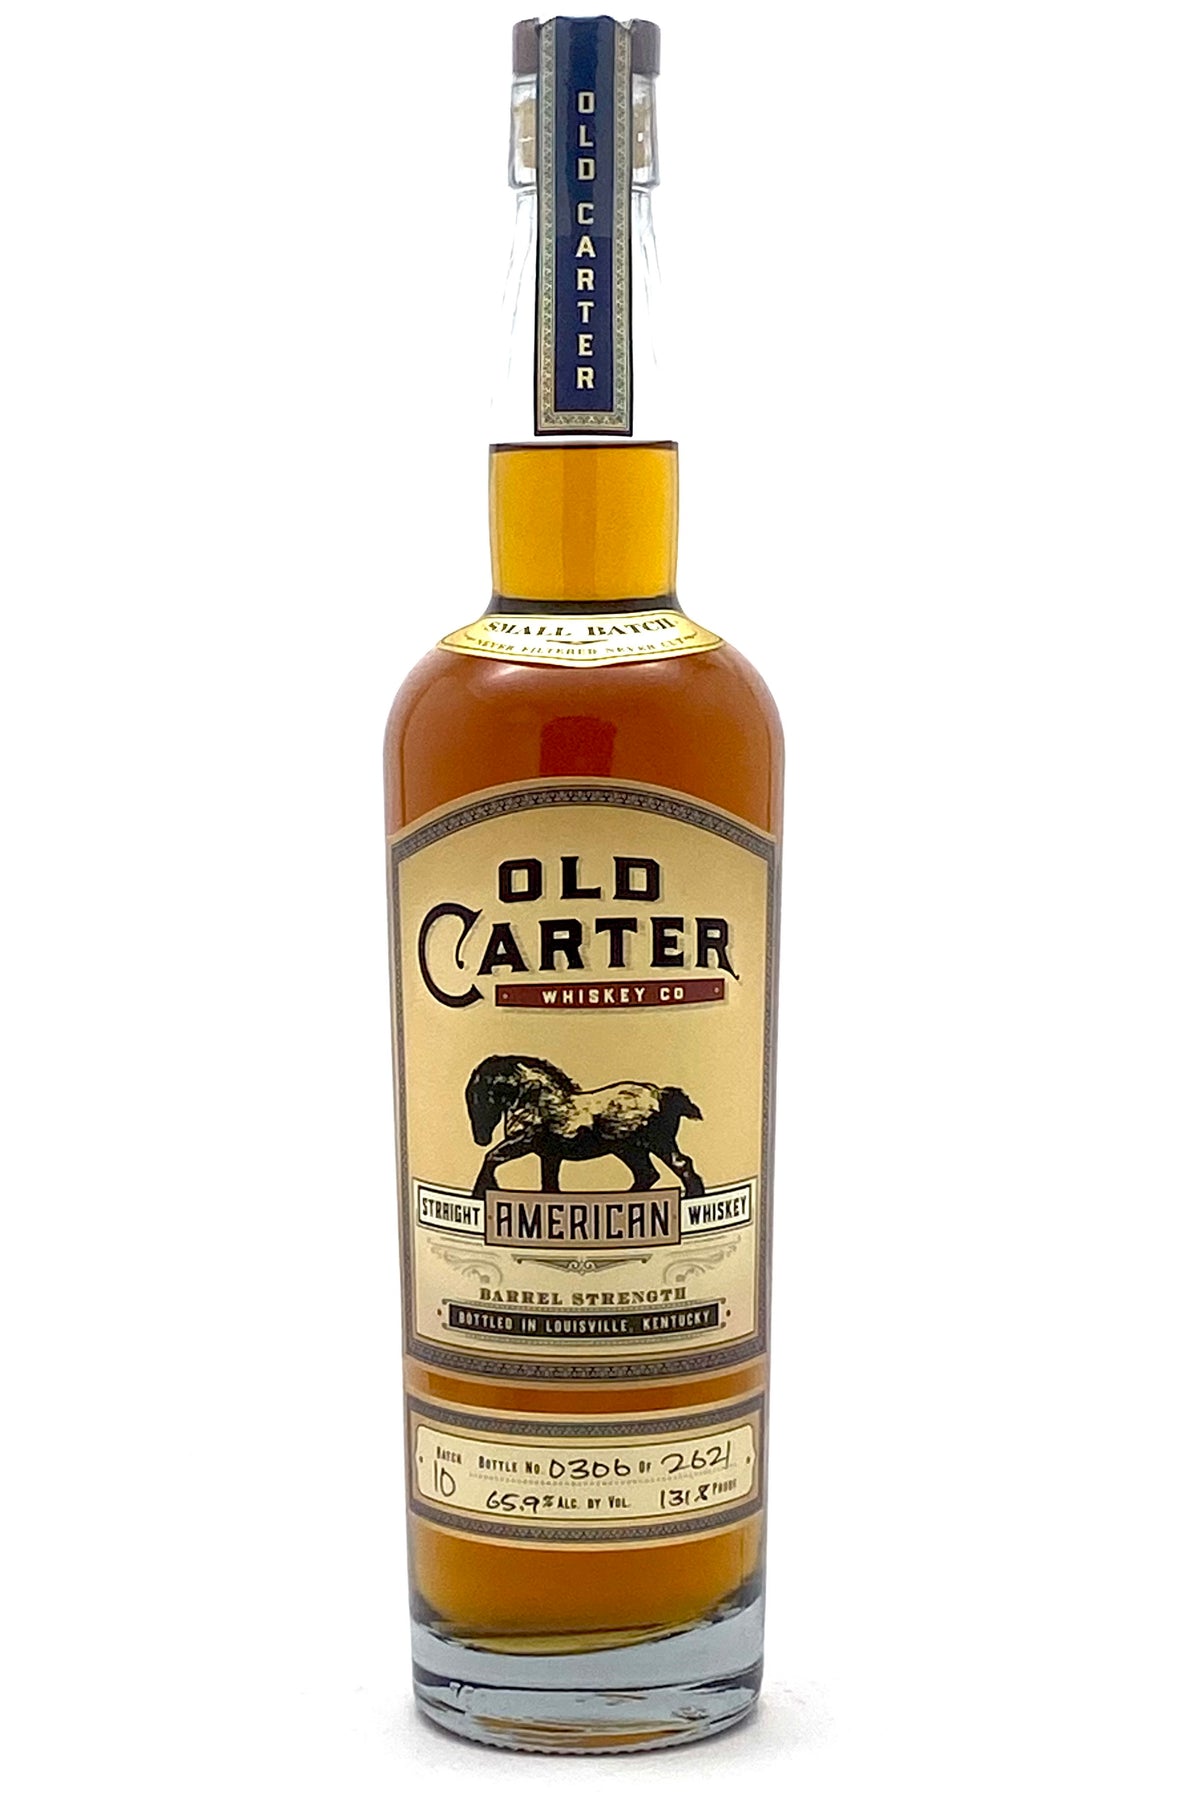 Old Carter #10 Small Batch American Whiskey